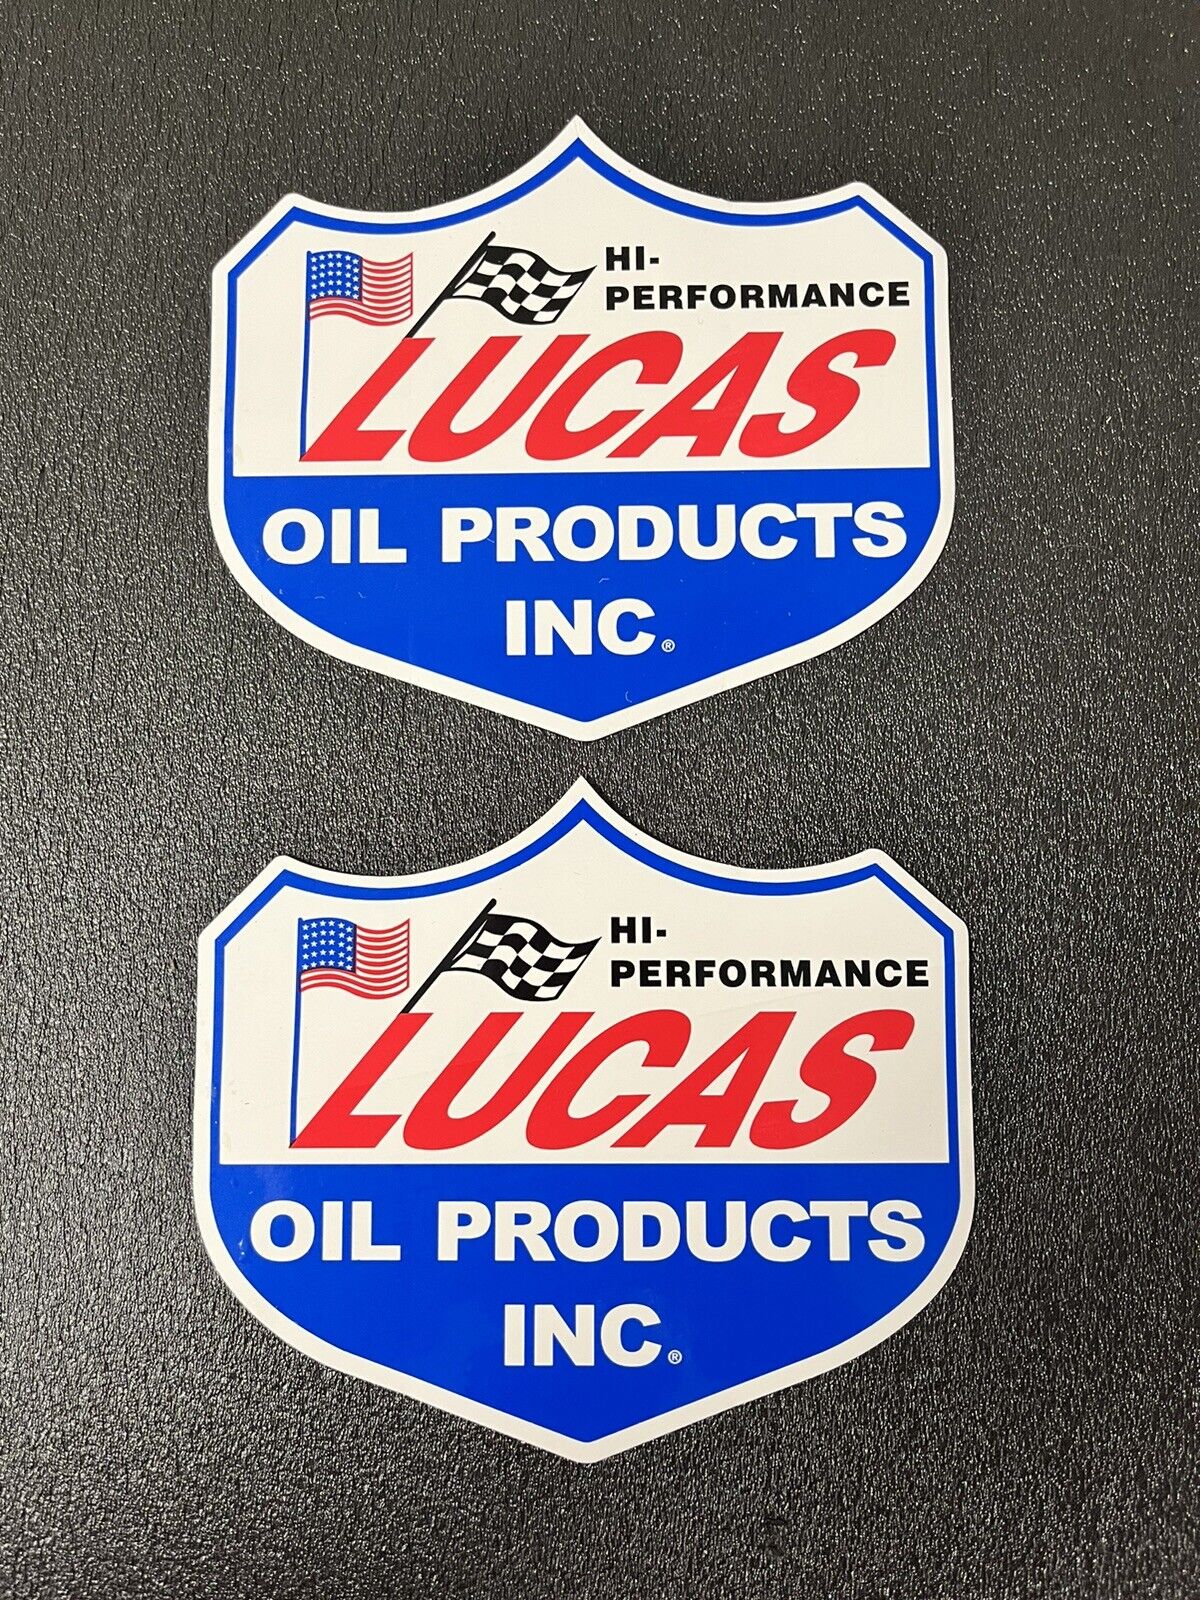 Lucas Oil Products - Set of 2 Original Racing Decals/Stickers 6”